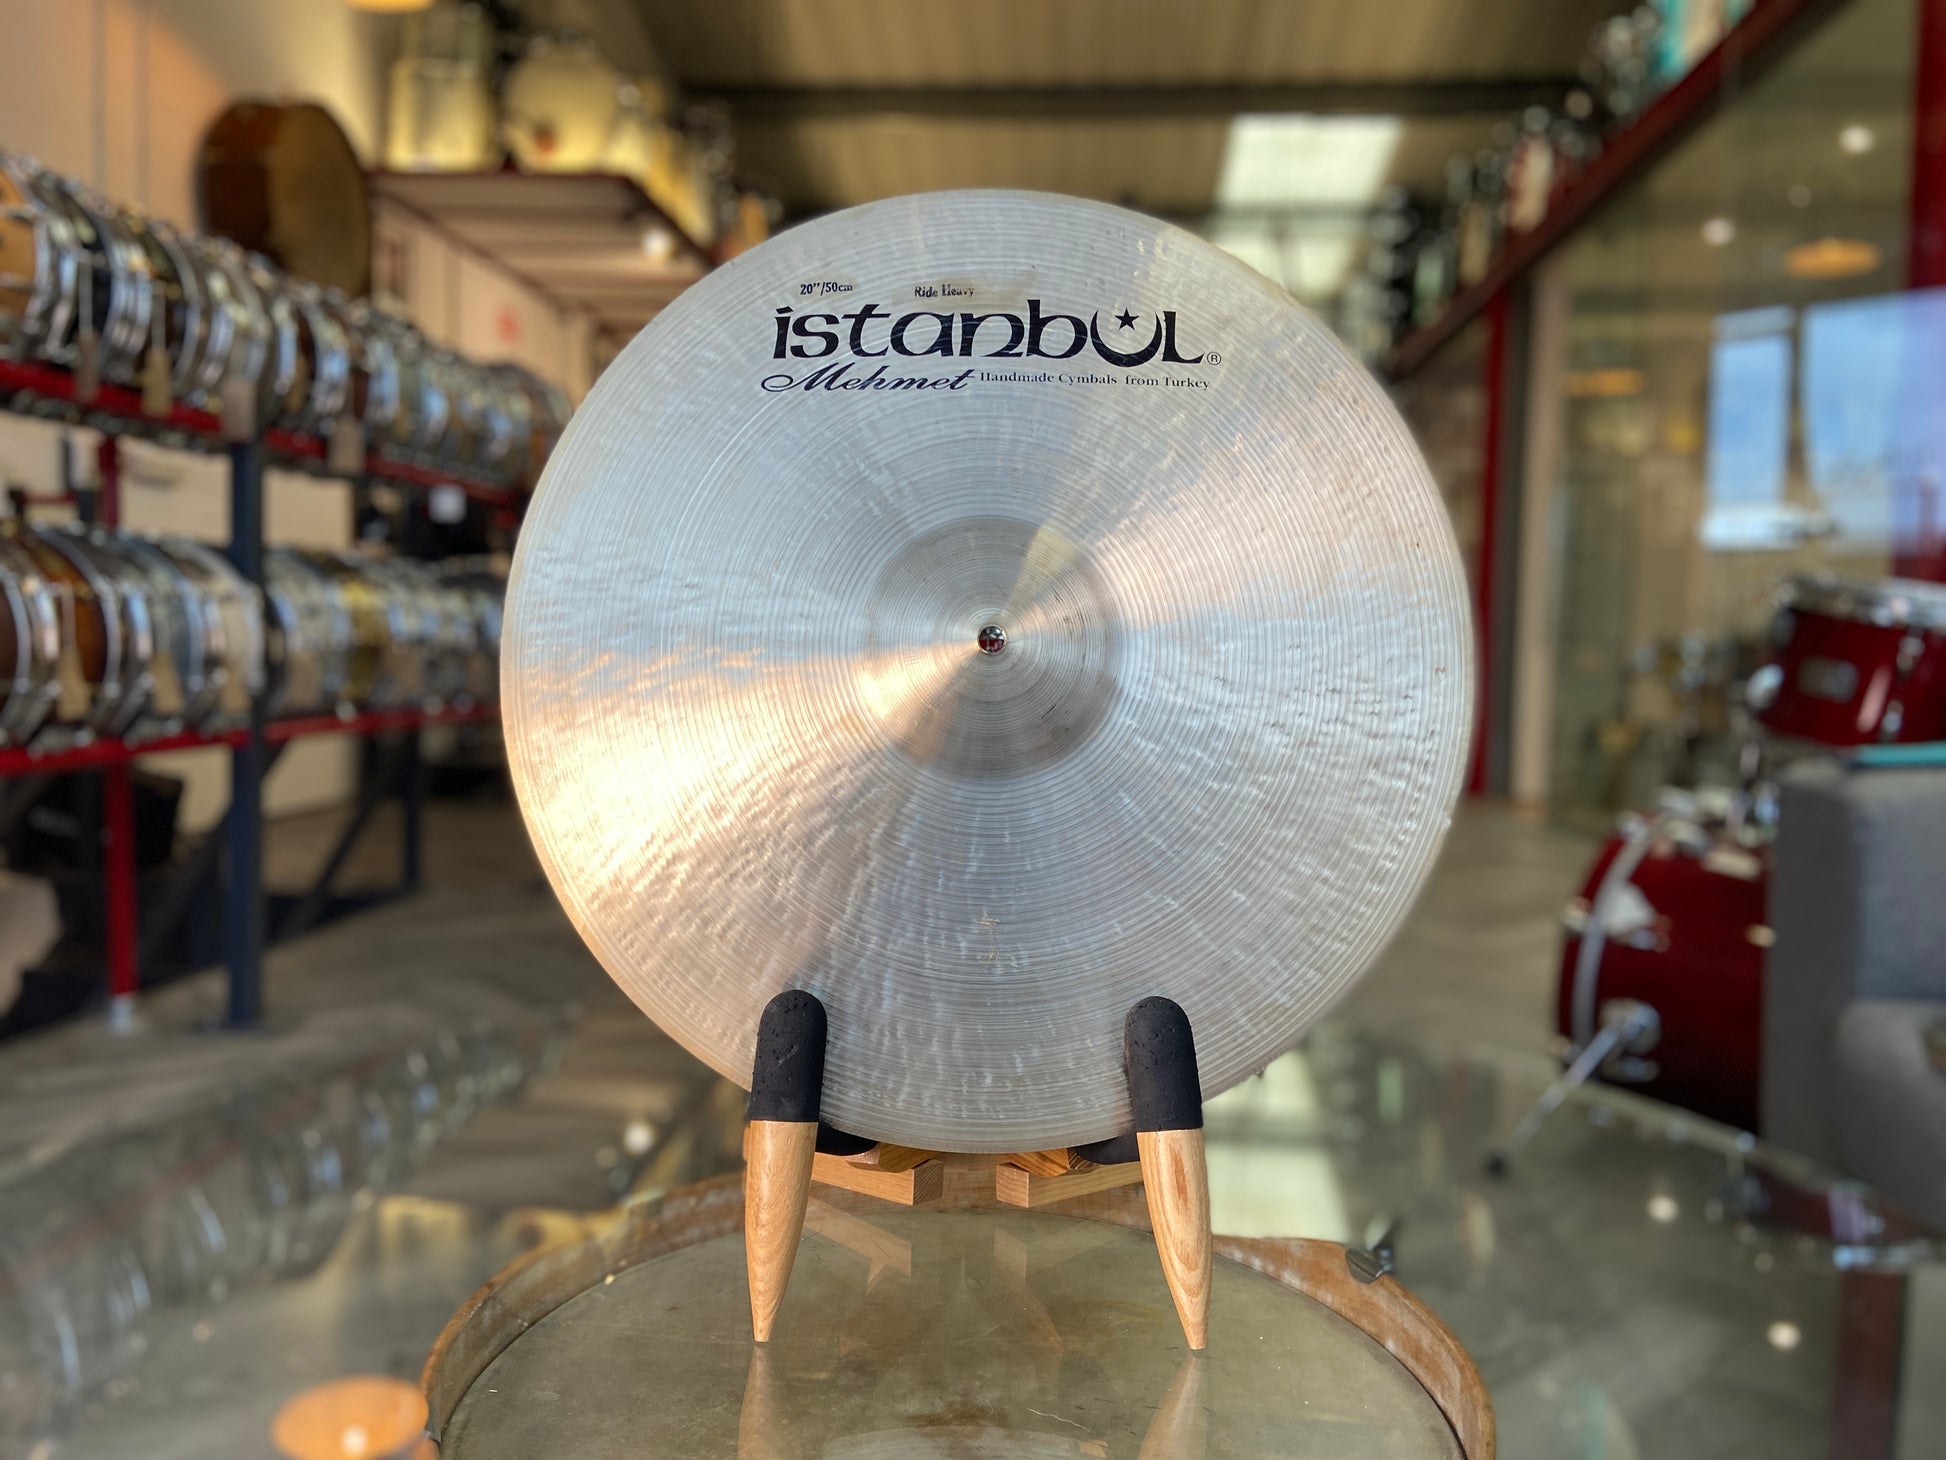 Istanbul Mehmet 19" Traditional Heavy Ride Cymbal